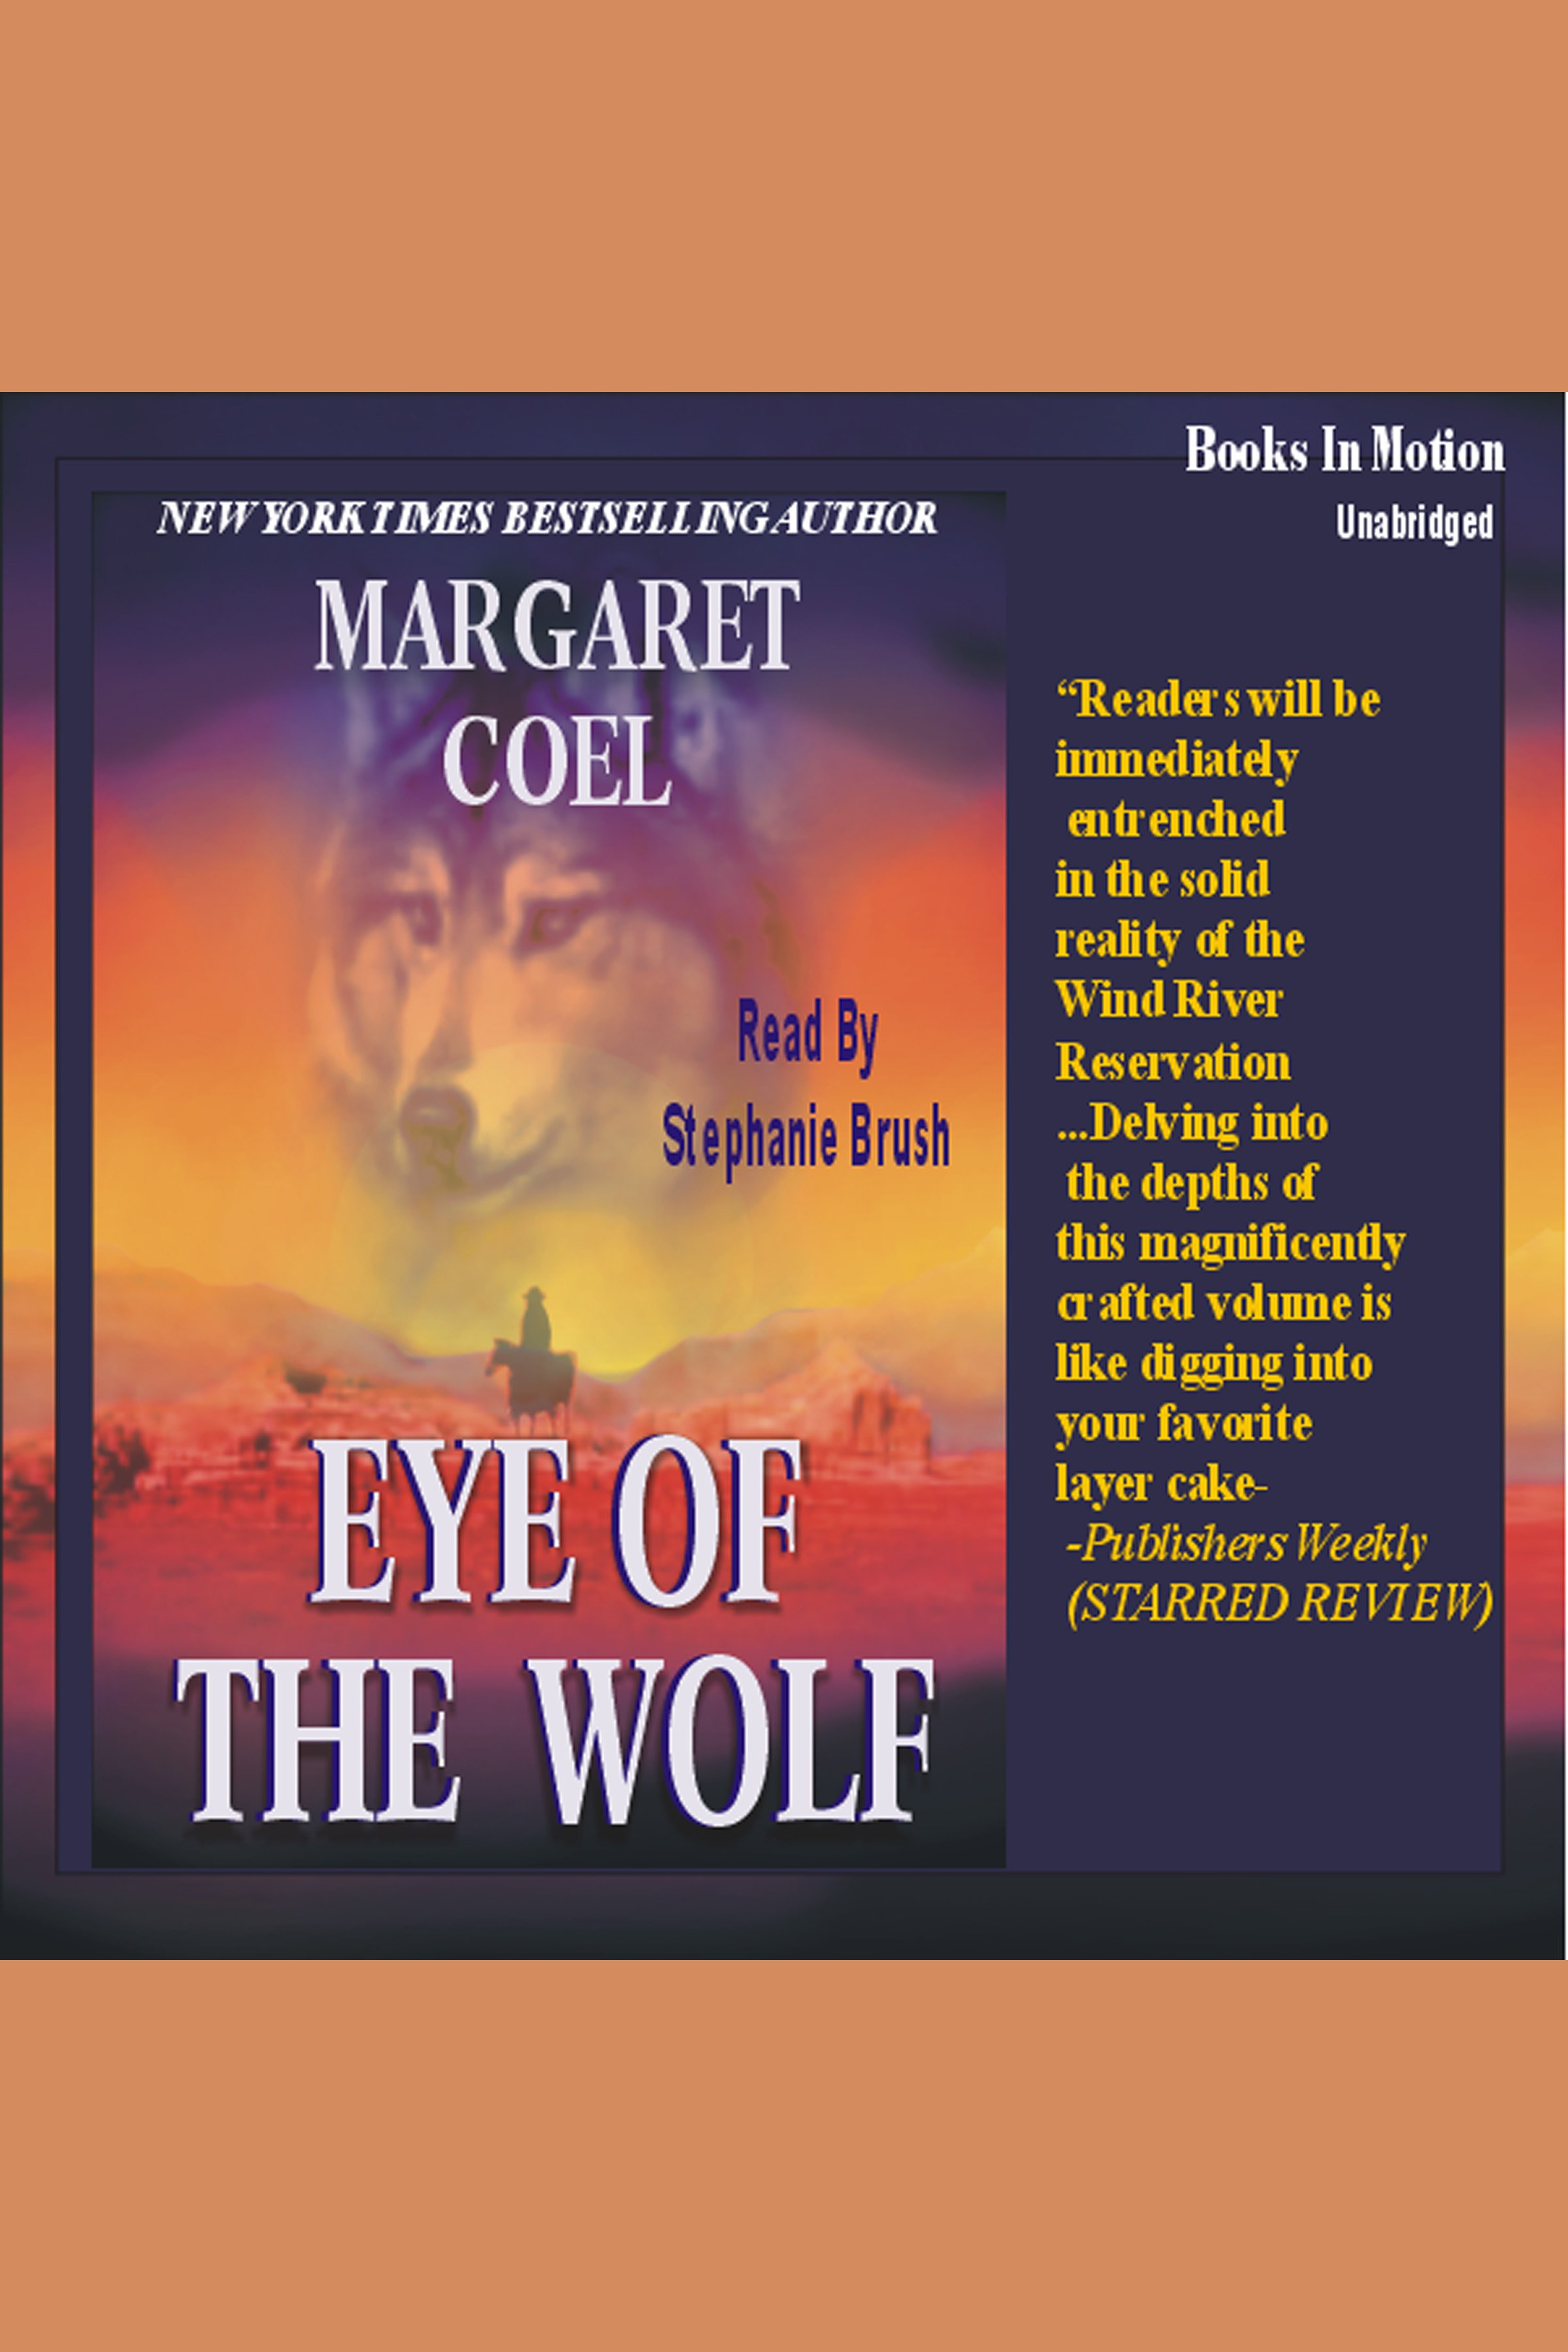 Eye of the wolf cover image